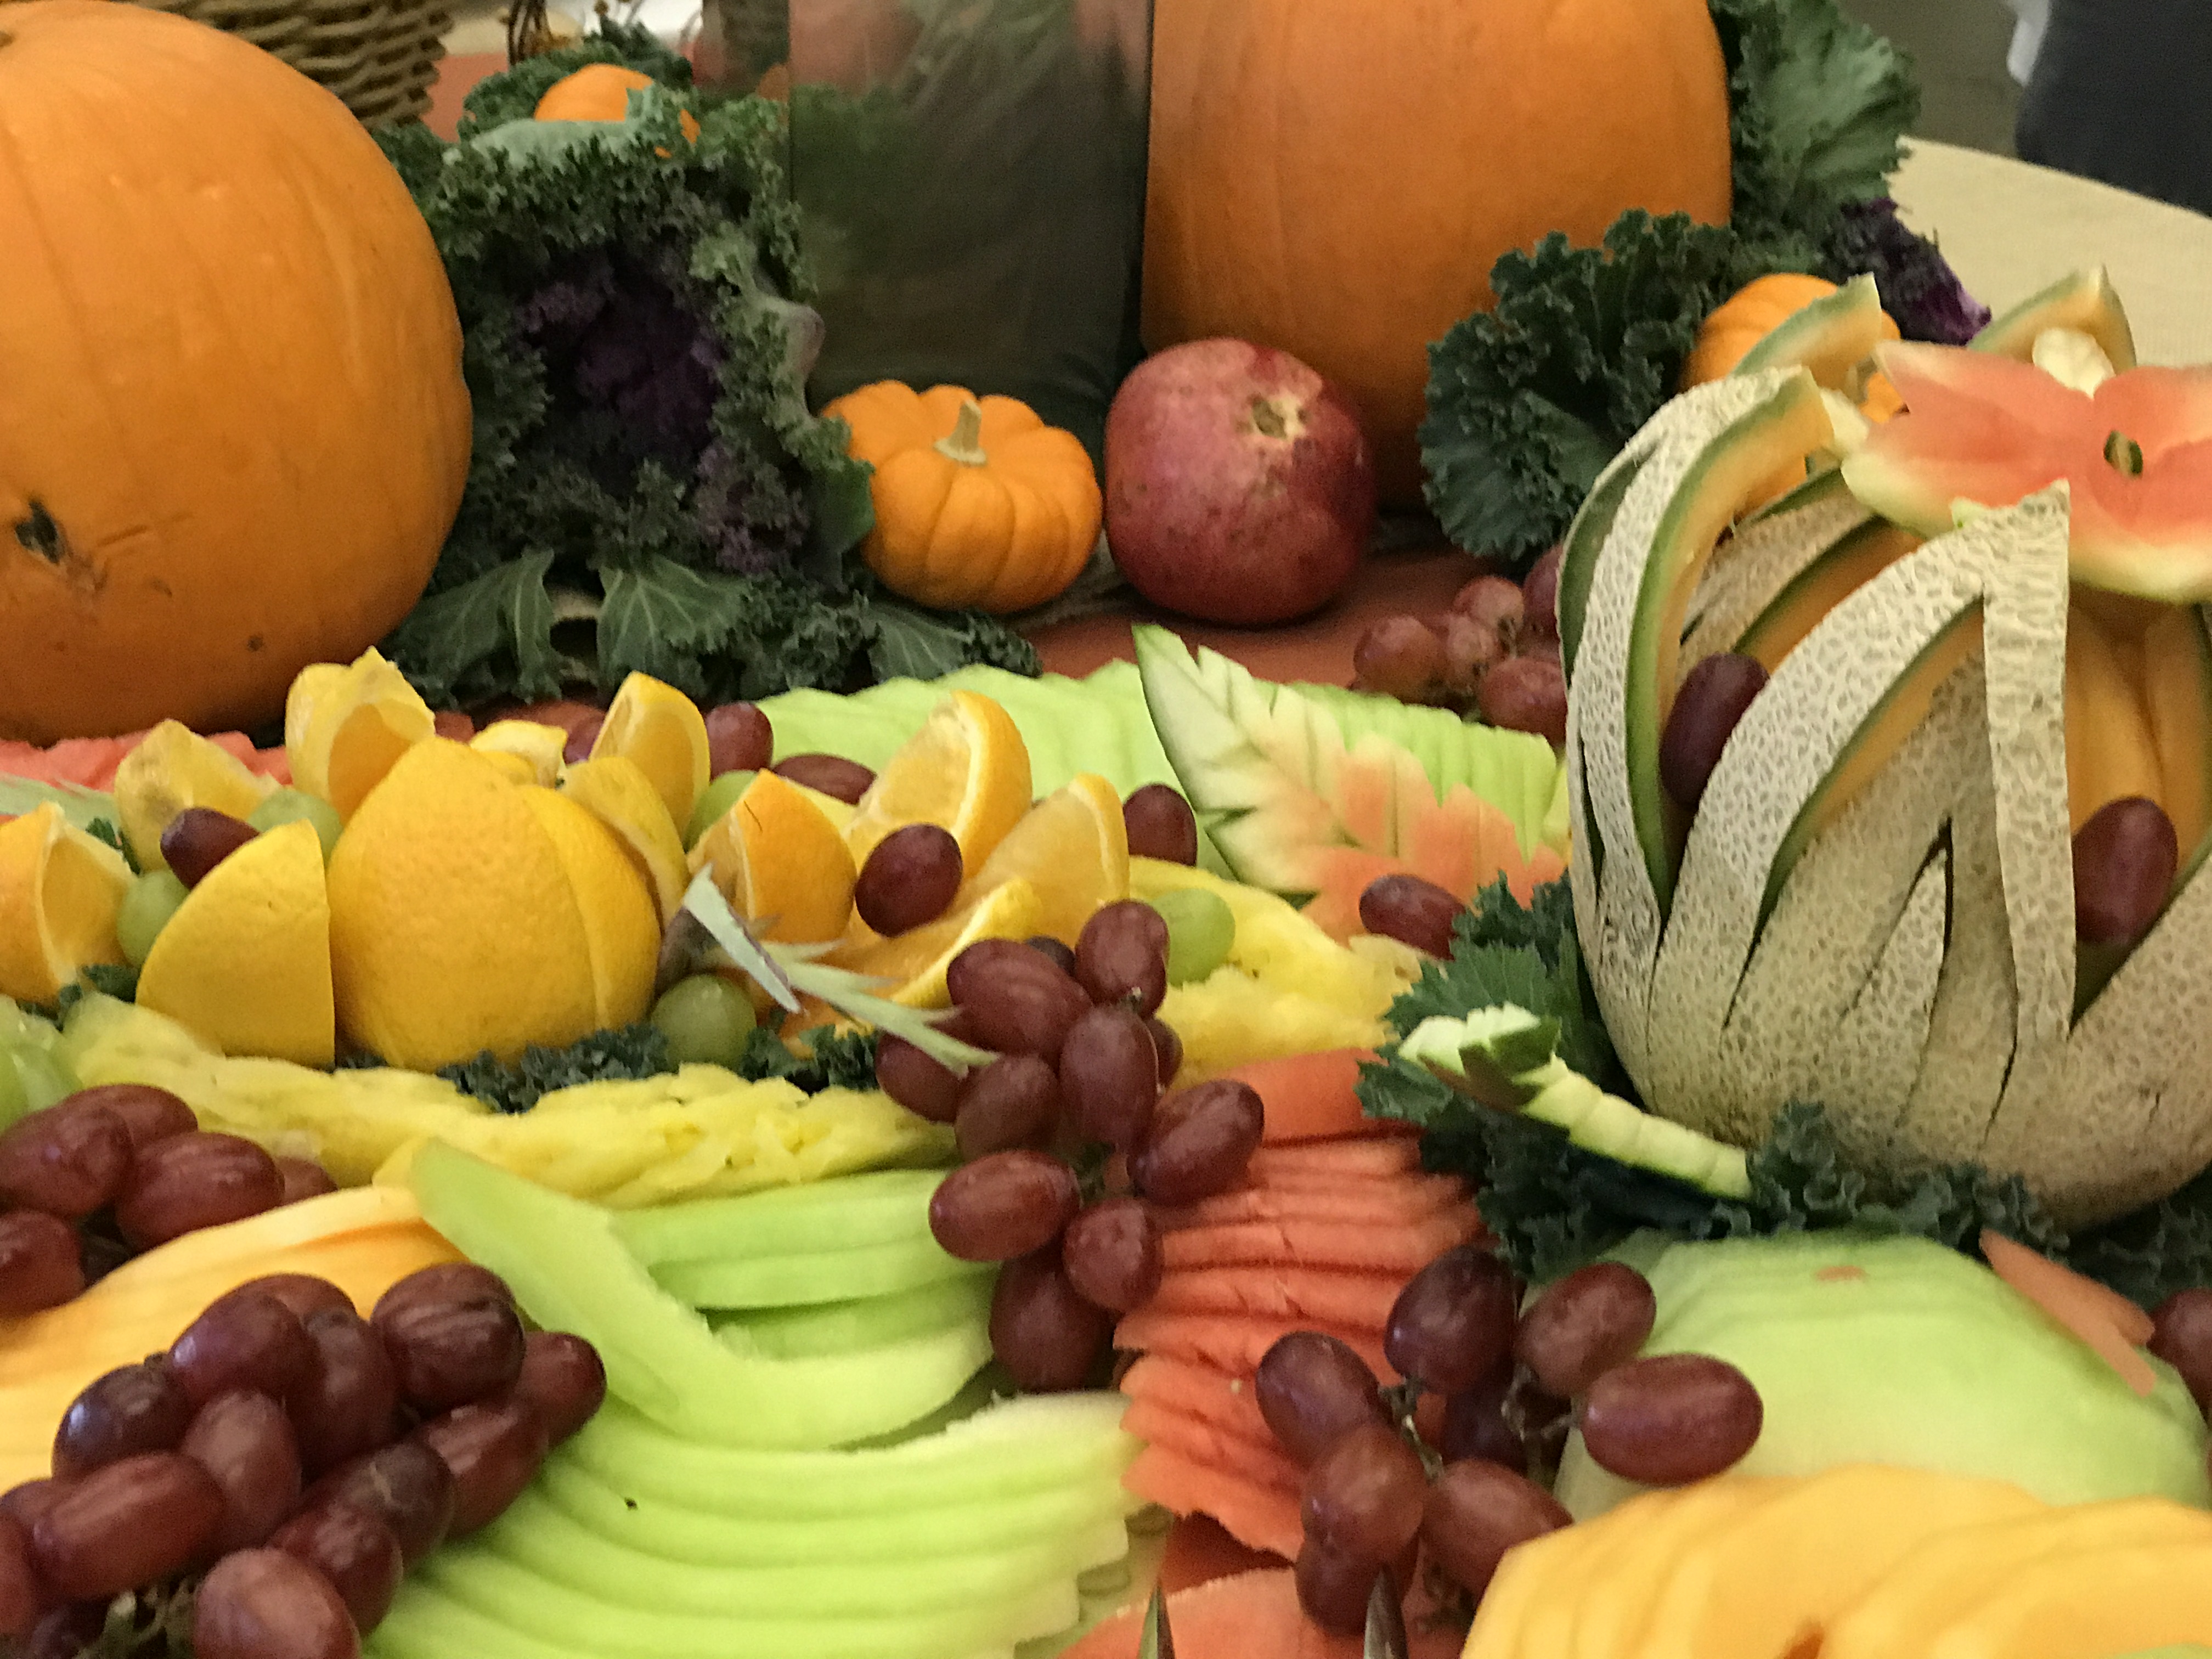 Fruit brought by attendees are arranged and cut in an artistic fashion for display and enjoyment on Wednesday, Oct. 18, 2017. Photo by Diane Carter. 